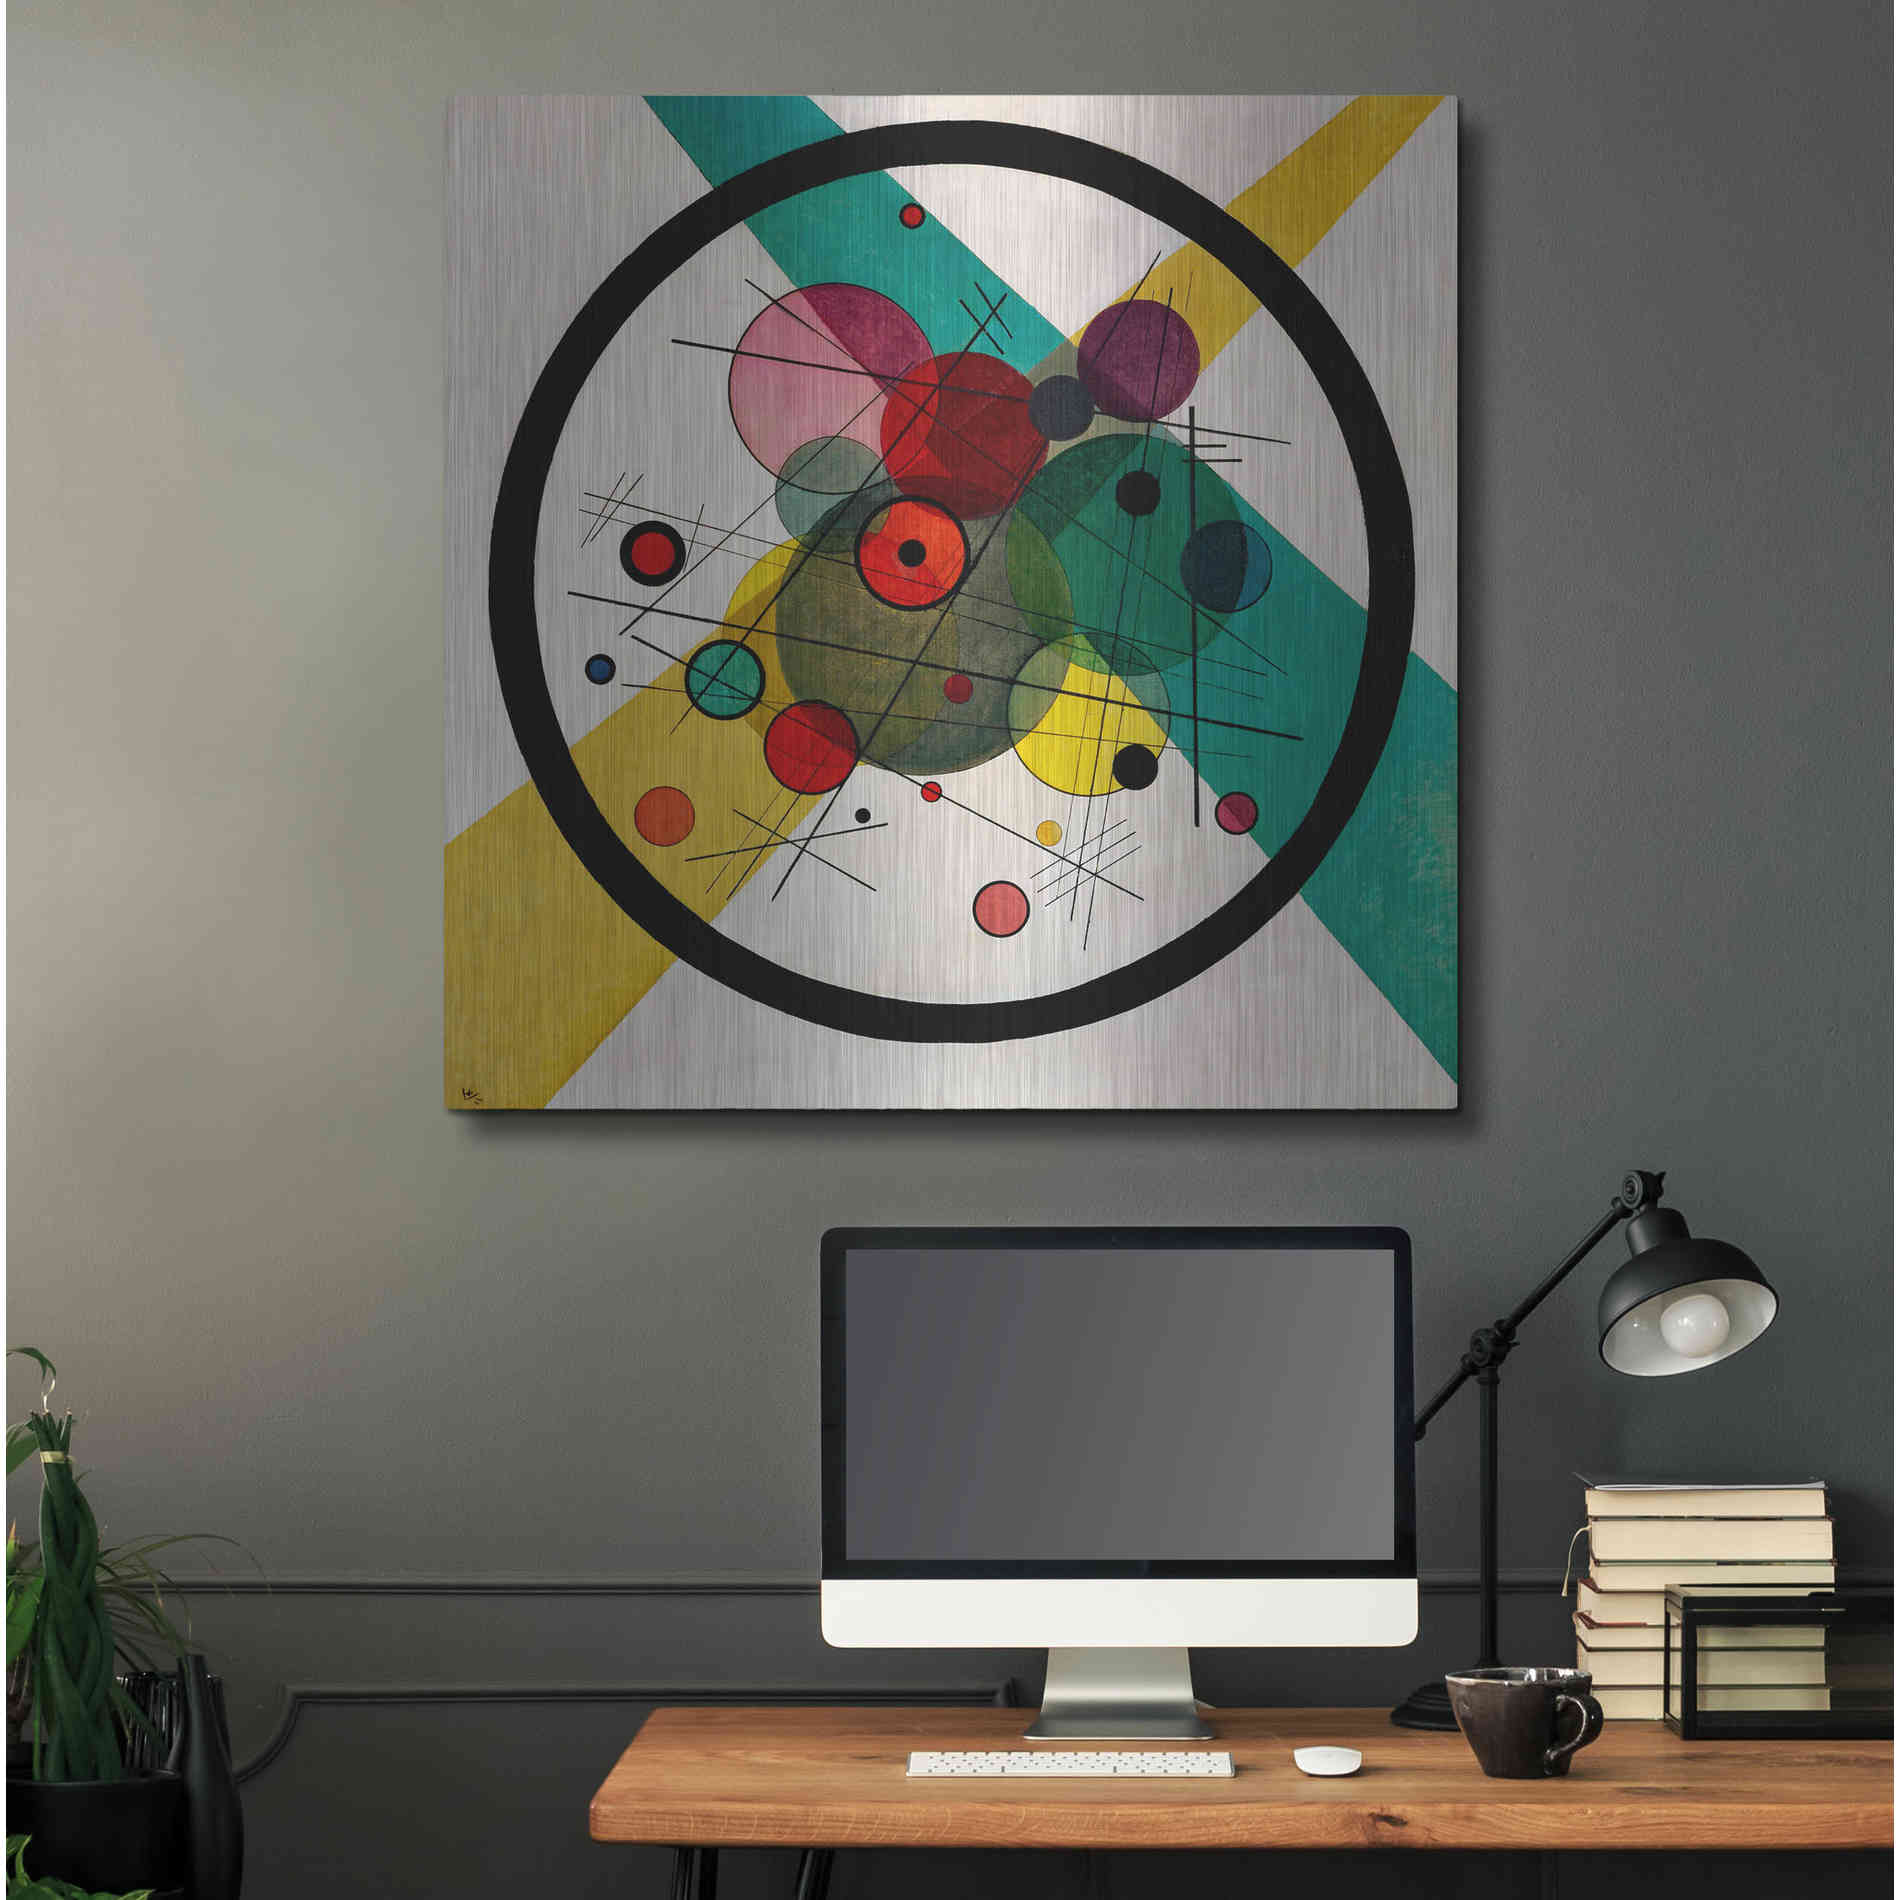 Luxe Metal Art 'Circles In A Circle' by Wassily Kandinsky, Metal Wall Art",36x36